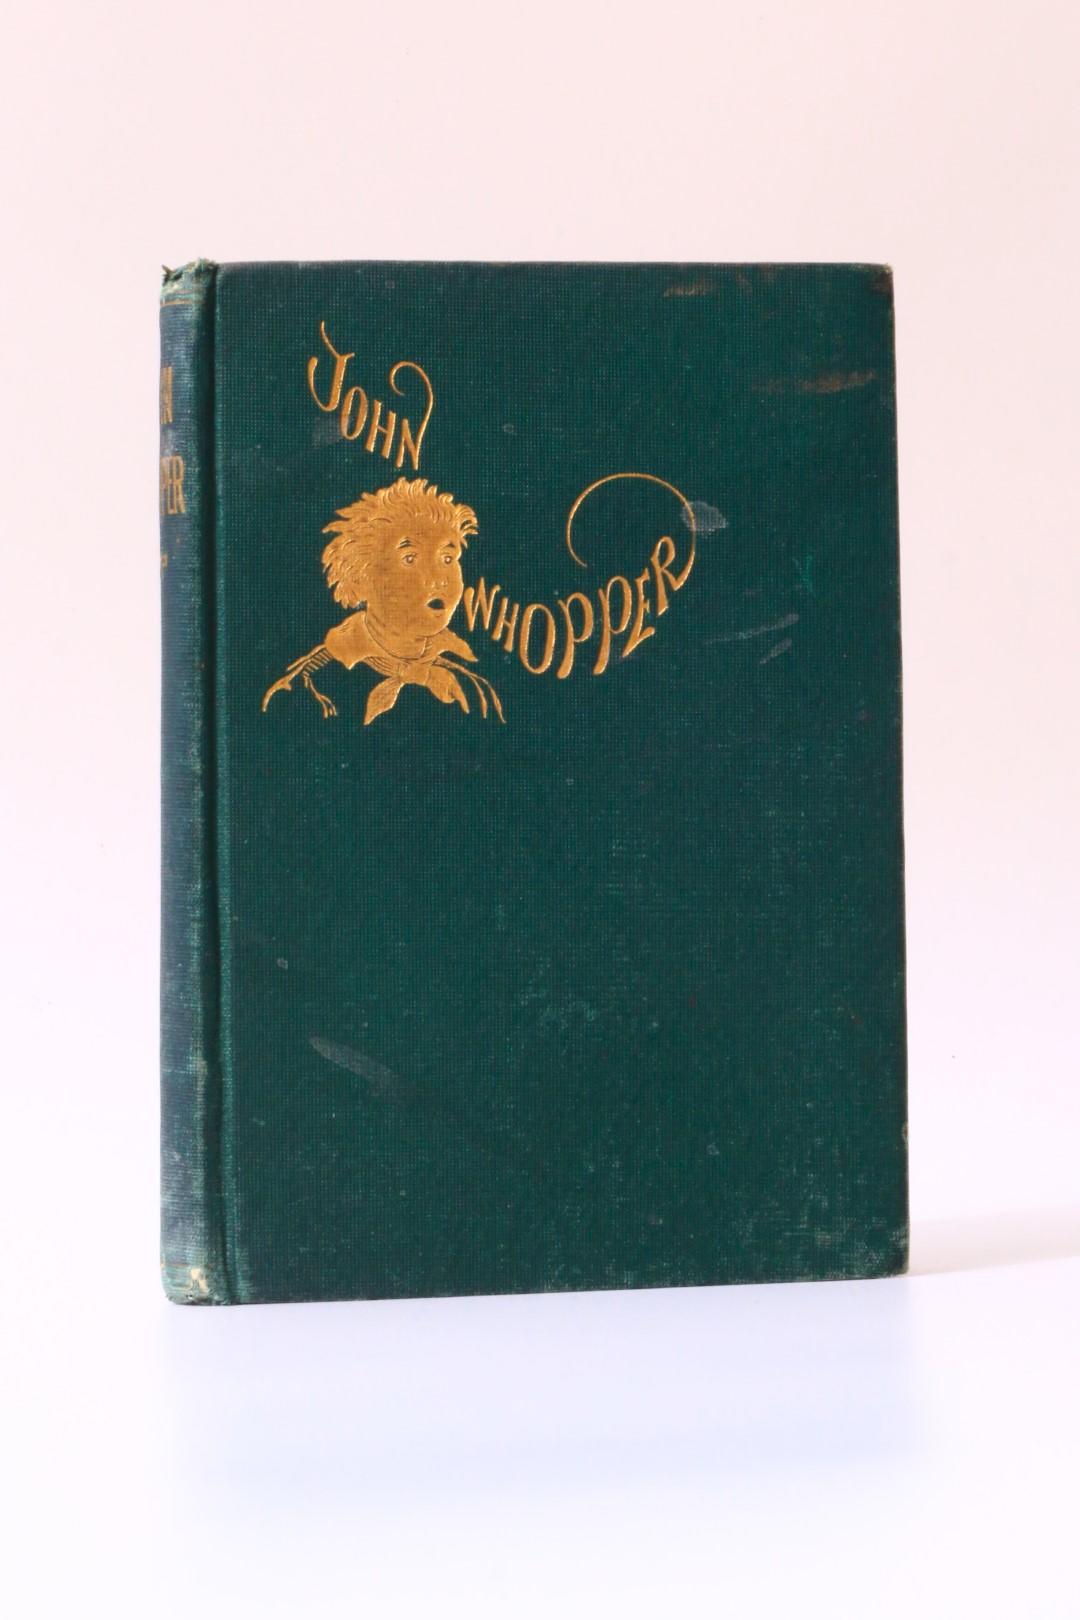 Thomas March Clark - John Whopper. The Newsboy - Roberts Brothers, 1871, First Edition.